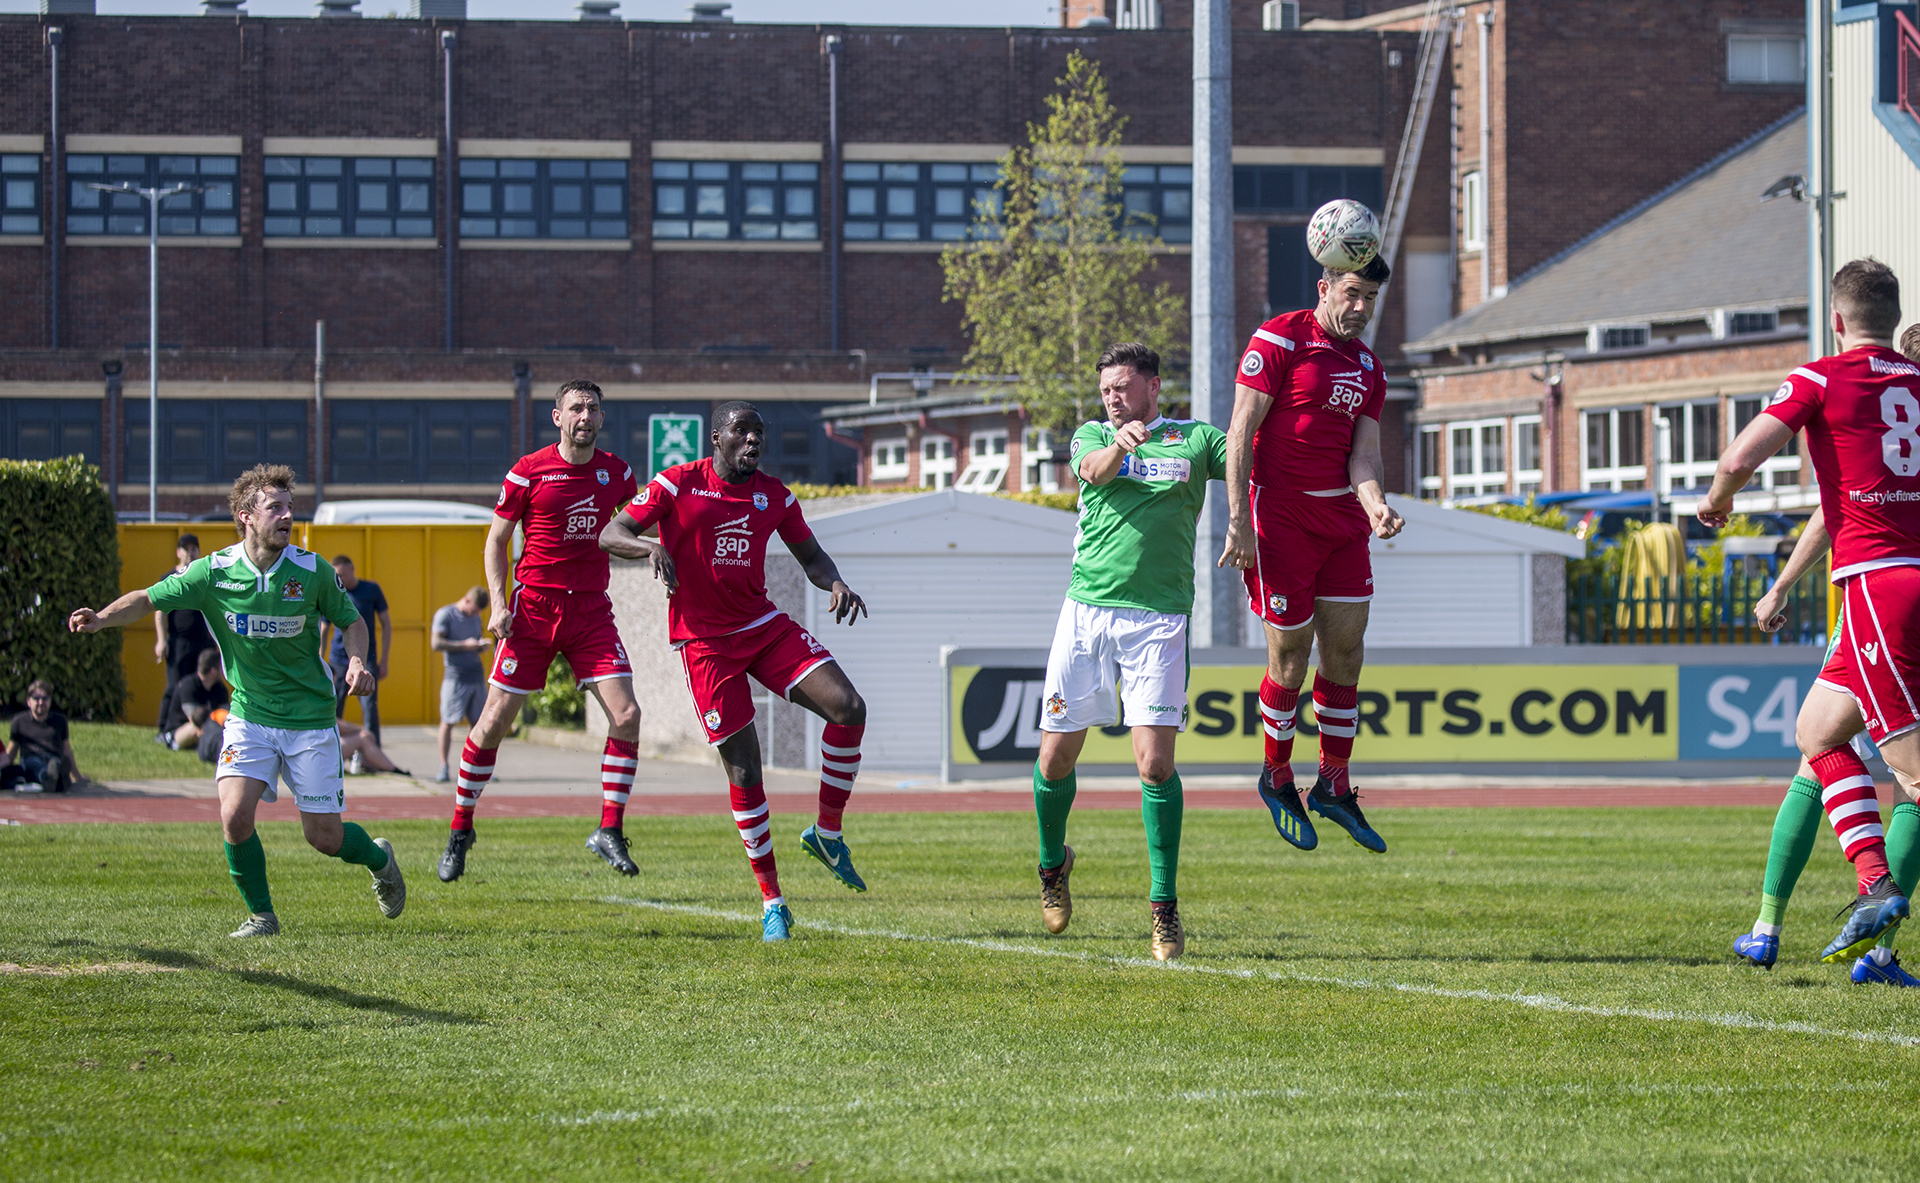 Michael Wilde heads home Jamie Insall's cross to give The Nomads the lead | © NCM Media